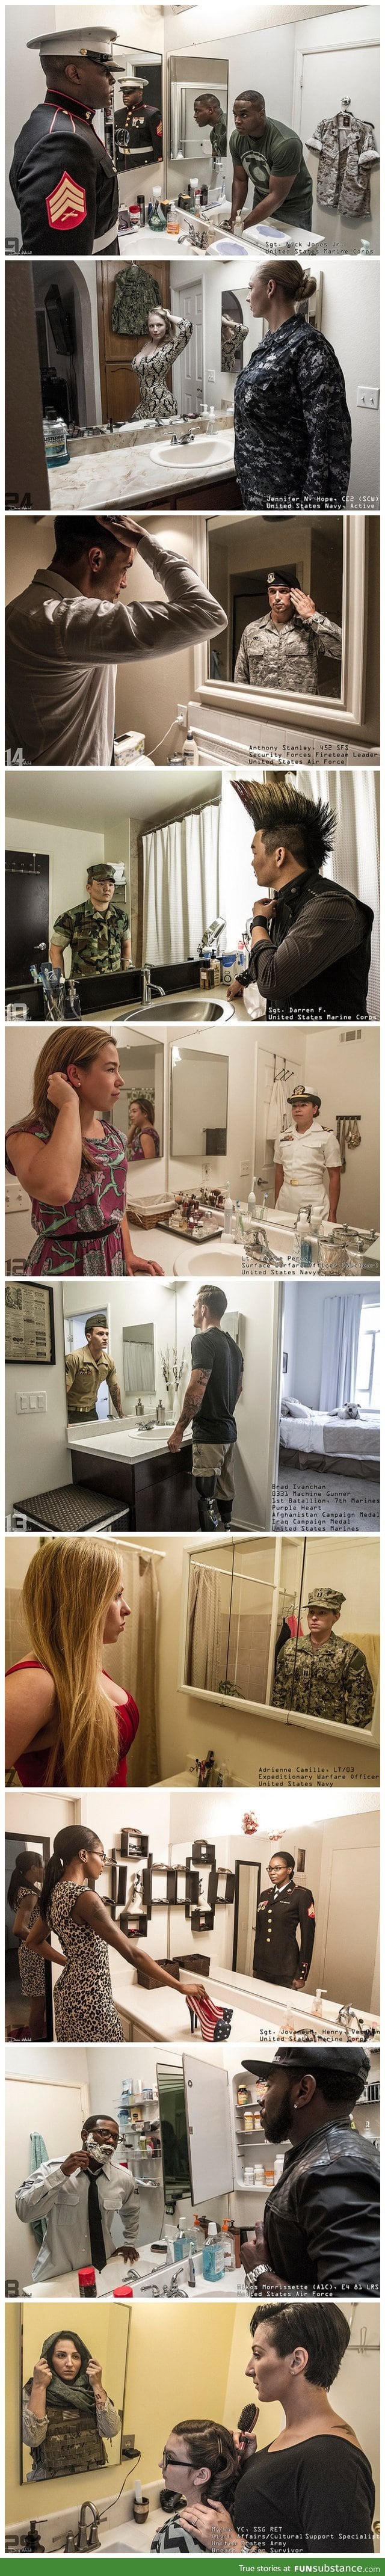 Photos Of Military Veterans Staring At Their Civilian Selves